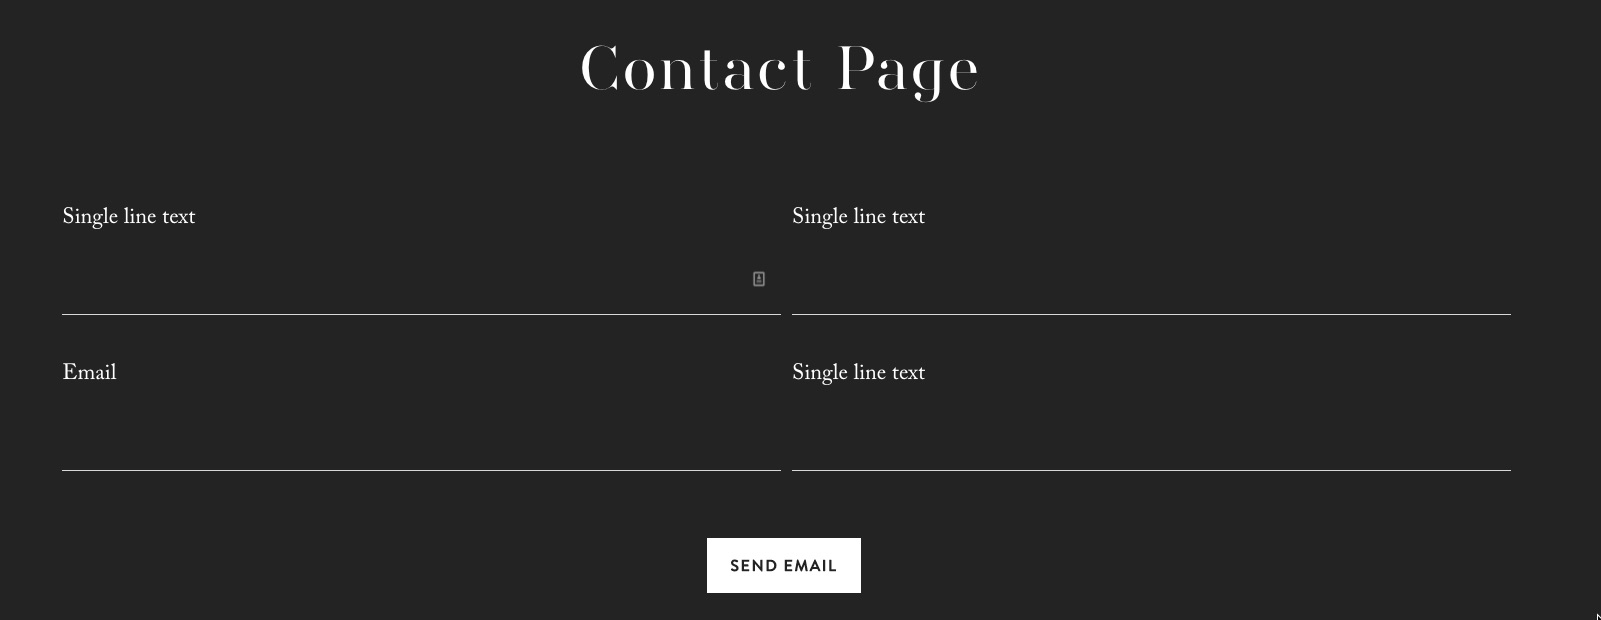 Cursor_and_Contact_Page_-_Mark_Allen